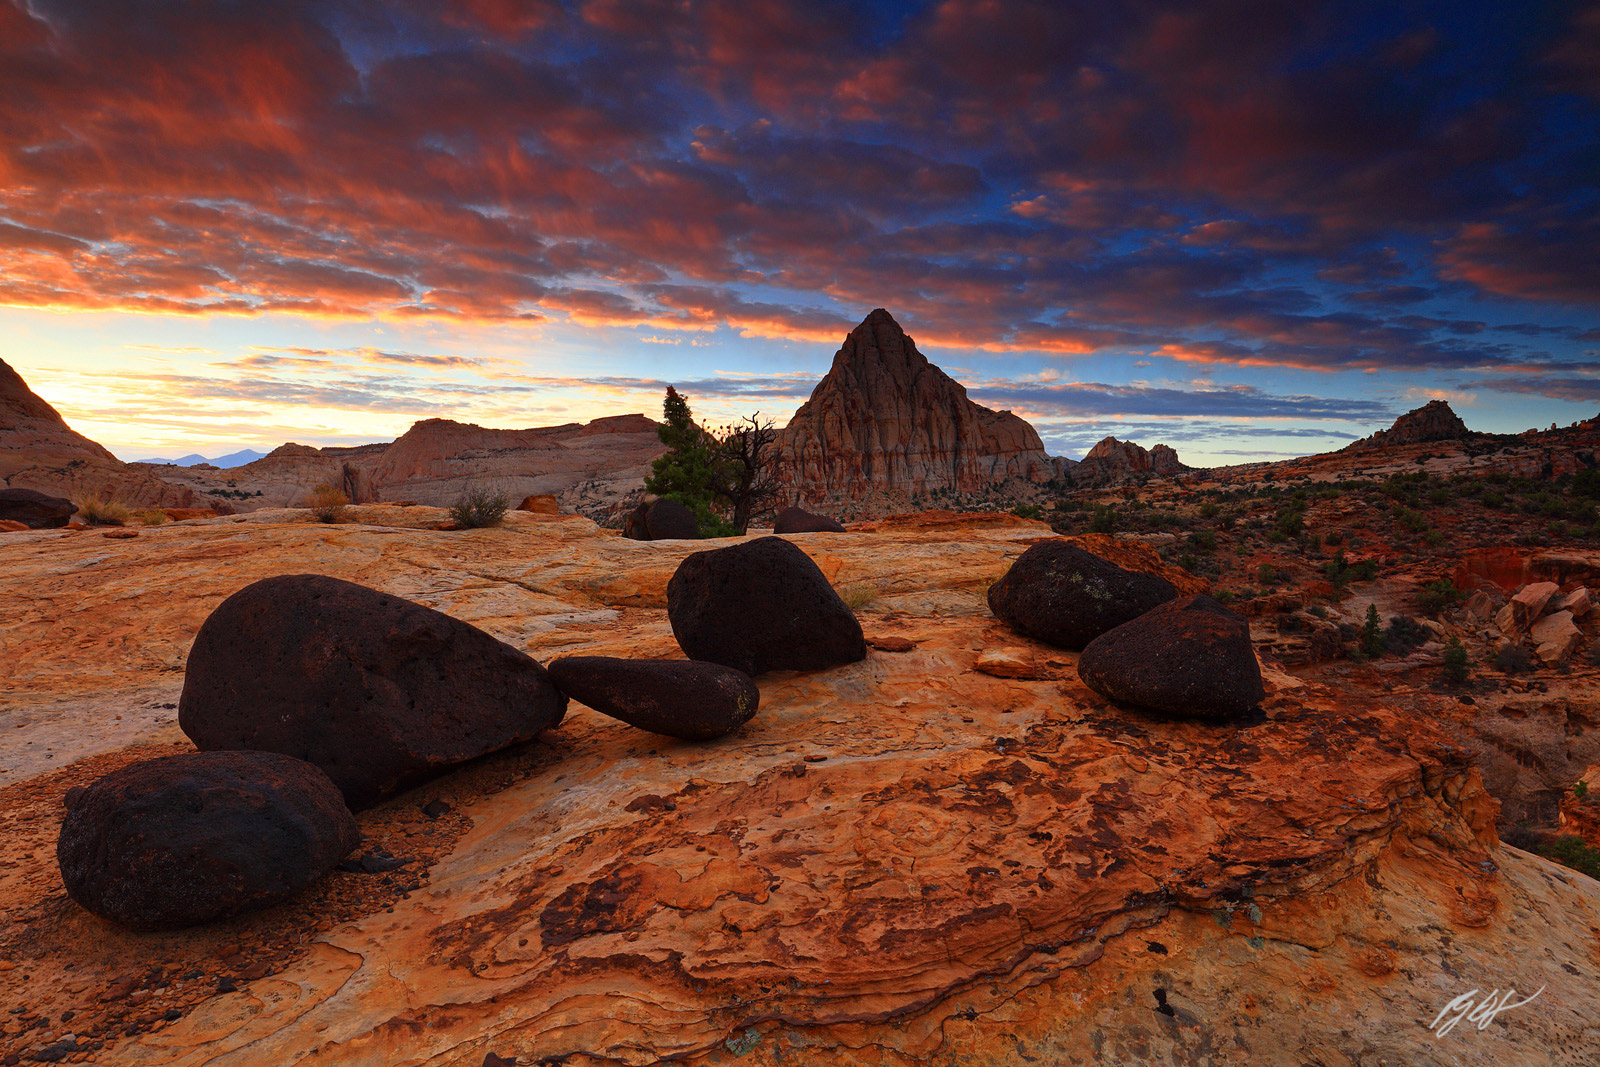 Sunrise over the Black Volcanic Boulders with Pectol's Pyramid in Capital Reef National Park in Utah